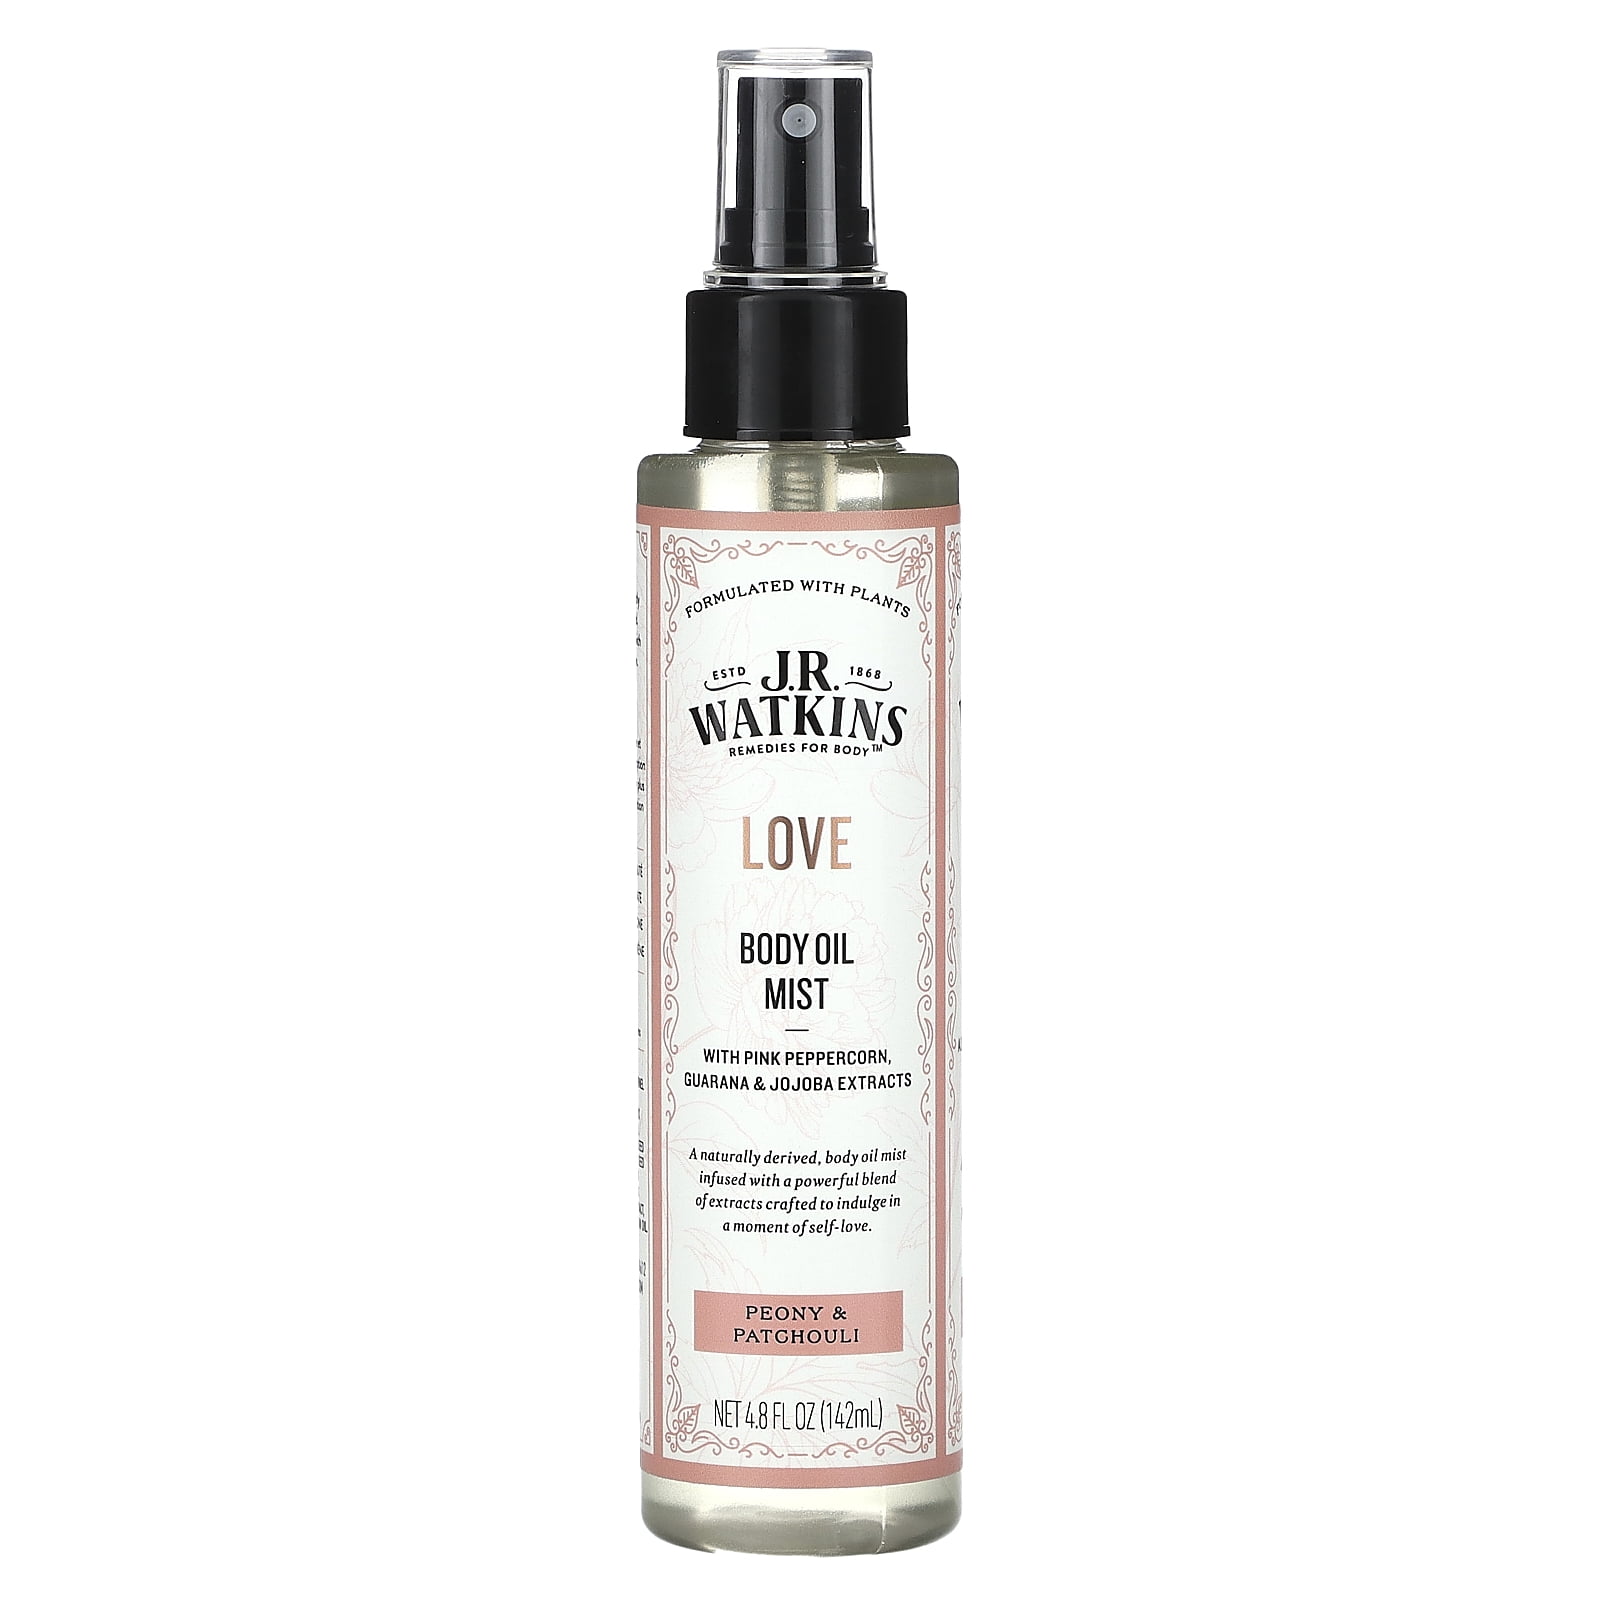 Indulge in sweet moments with Wild Plus strawberry shortcake body oil , body  juice oil